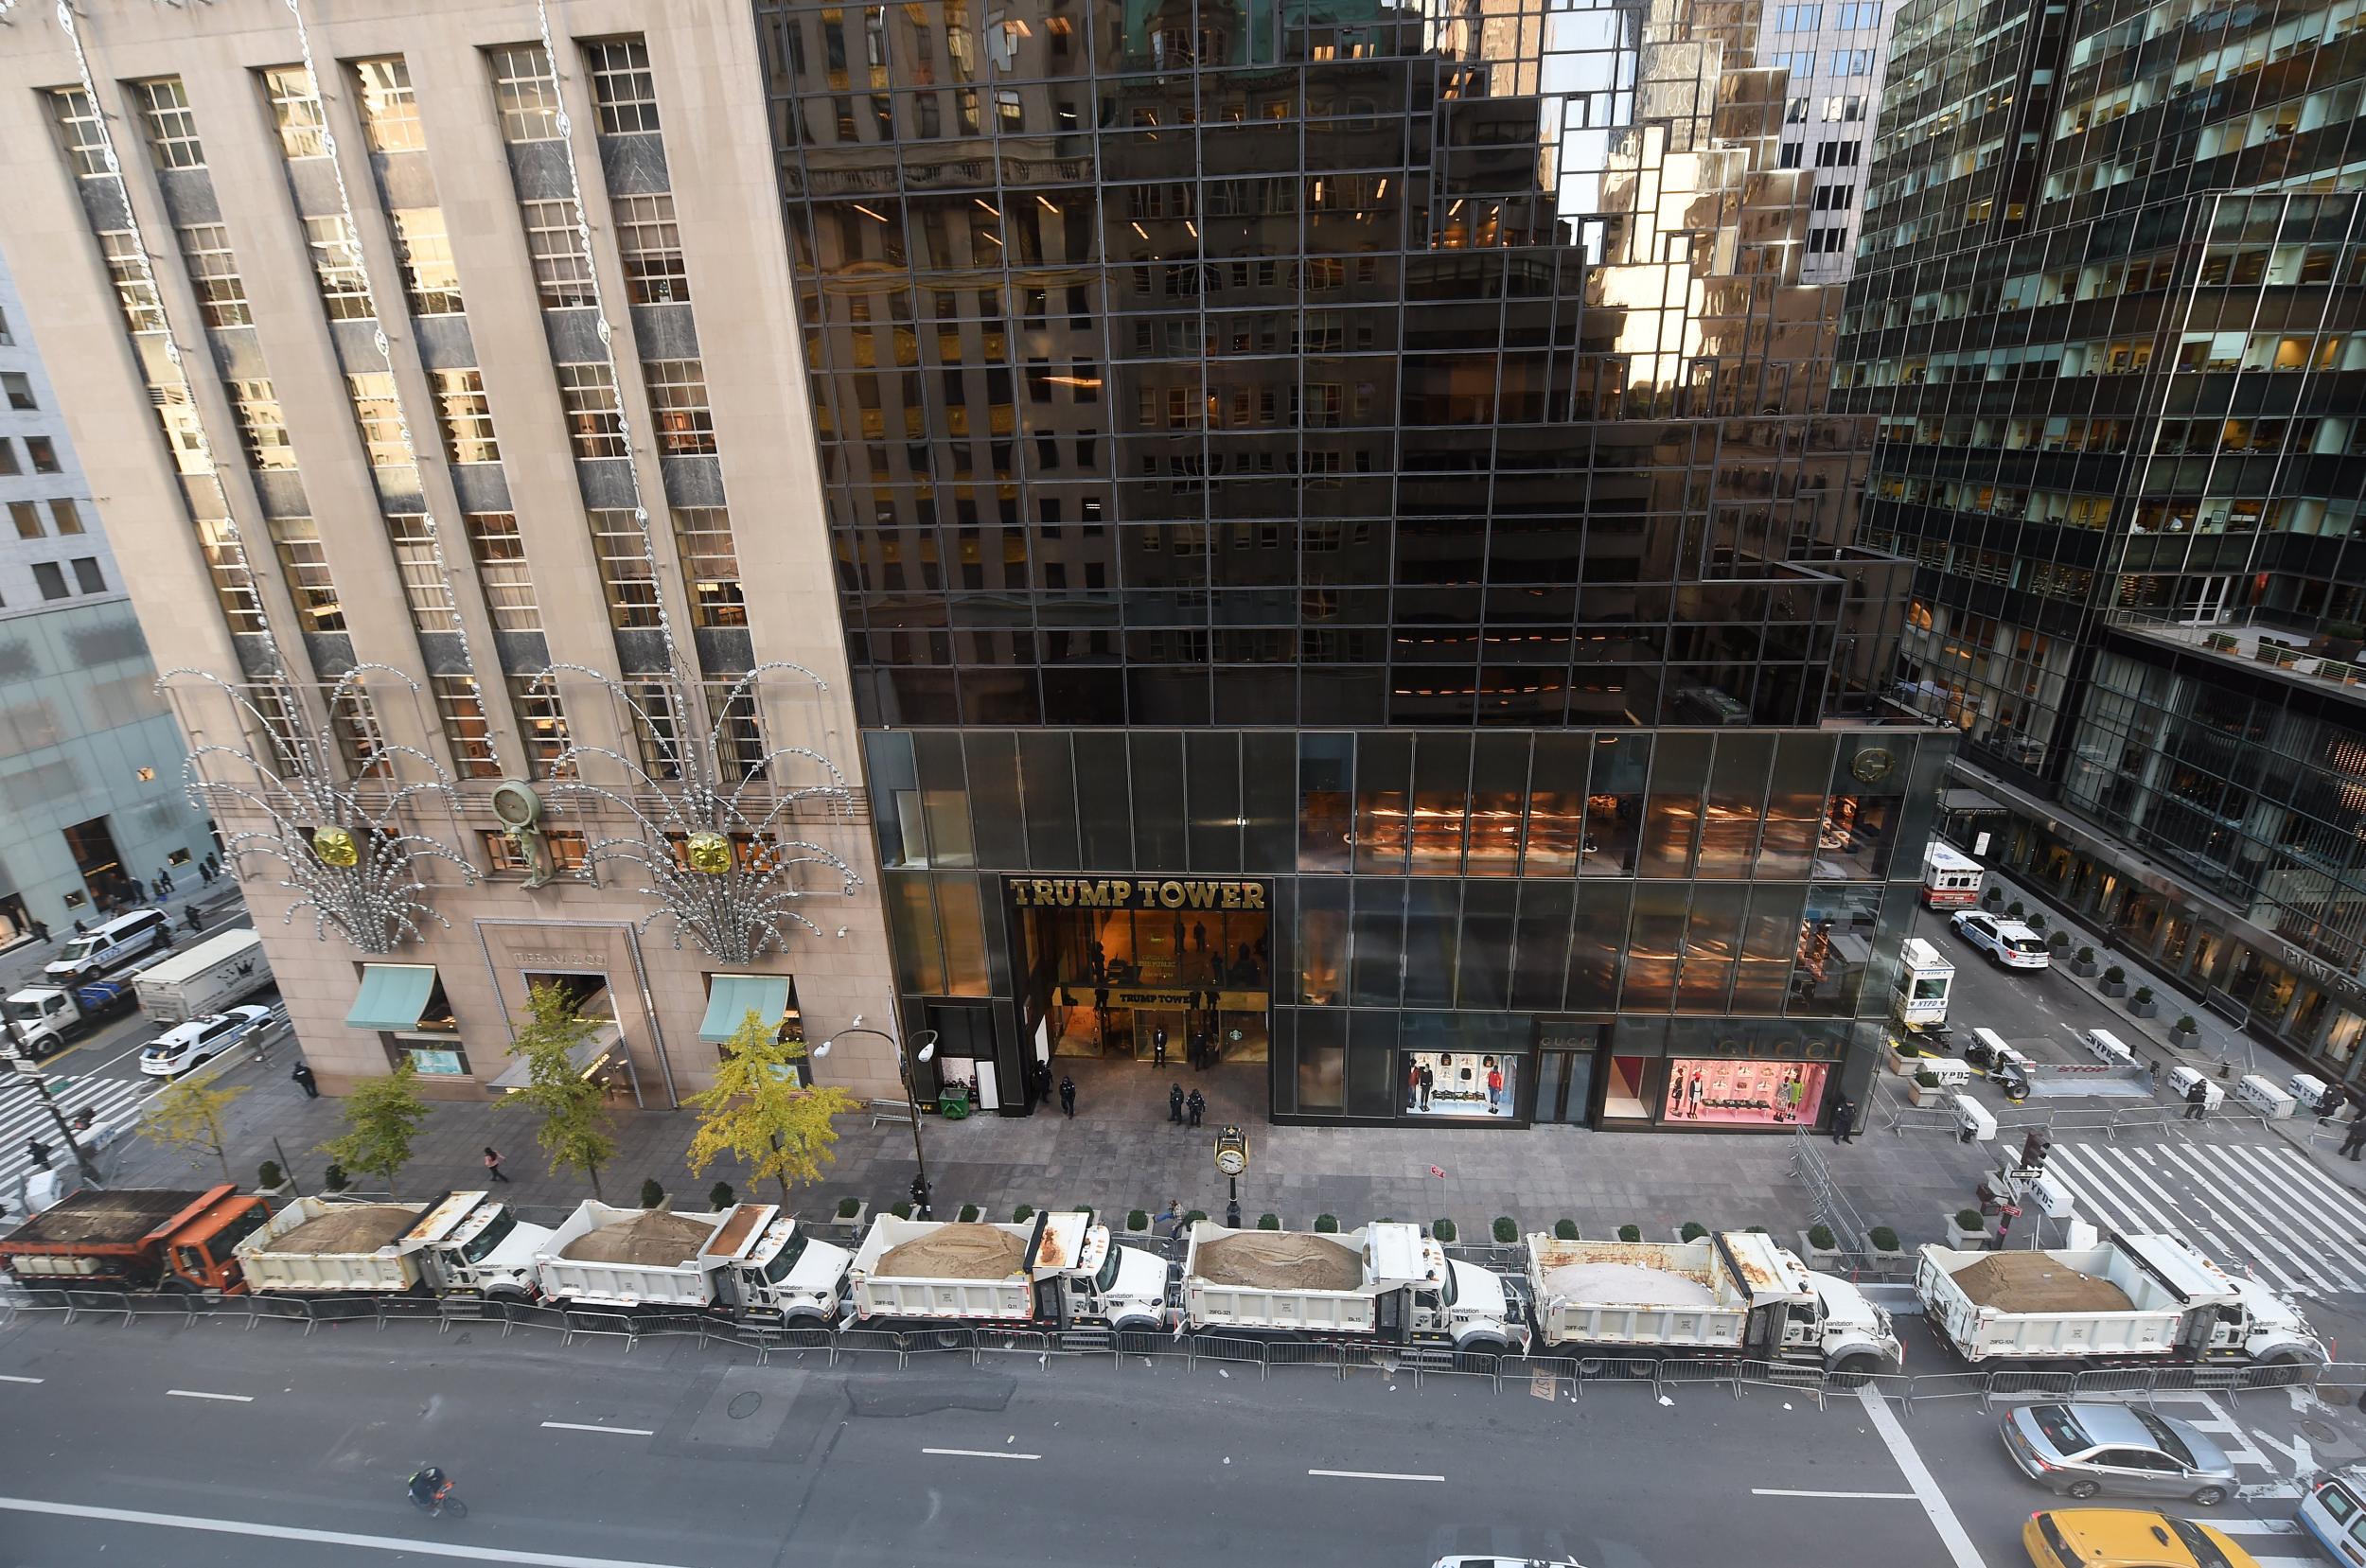 A protective barrier of Sanitation Department trucks are parked in front of Trump Tower Getty